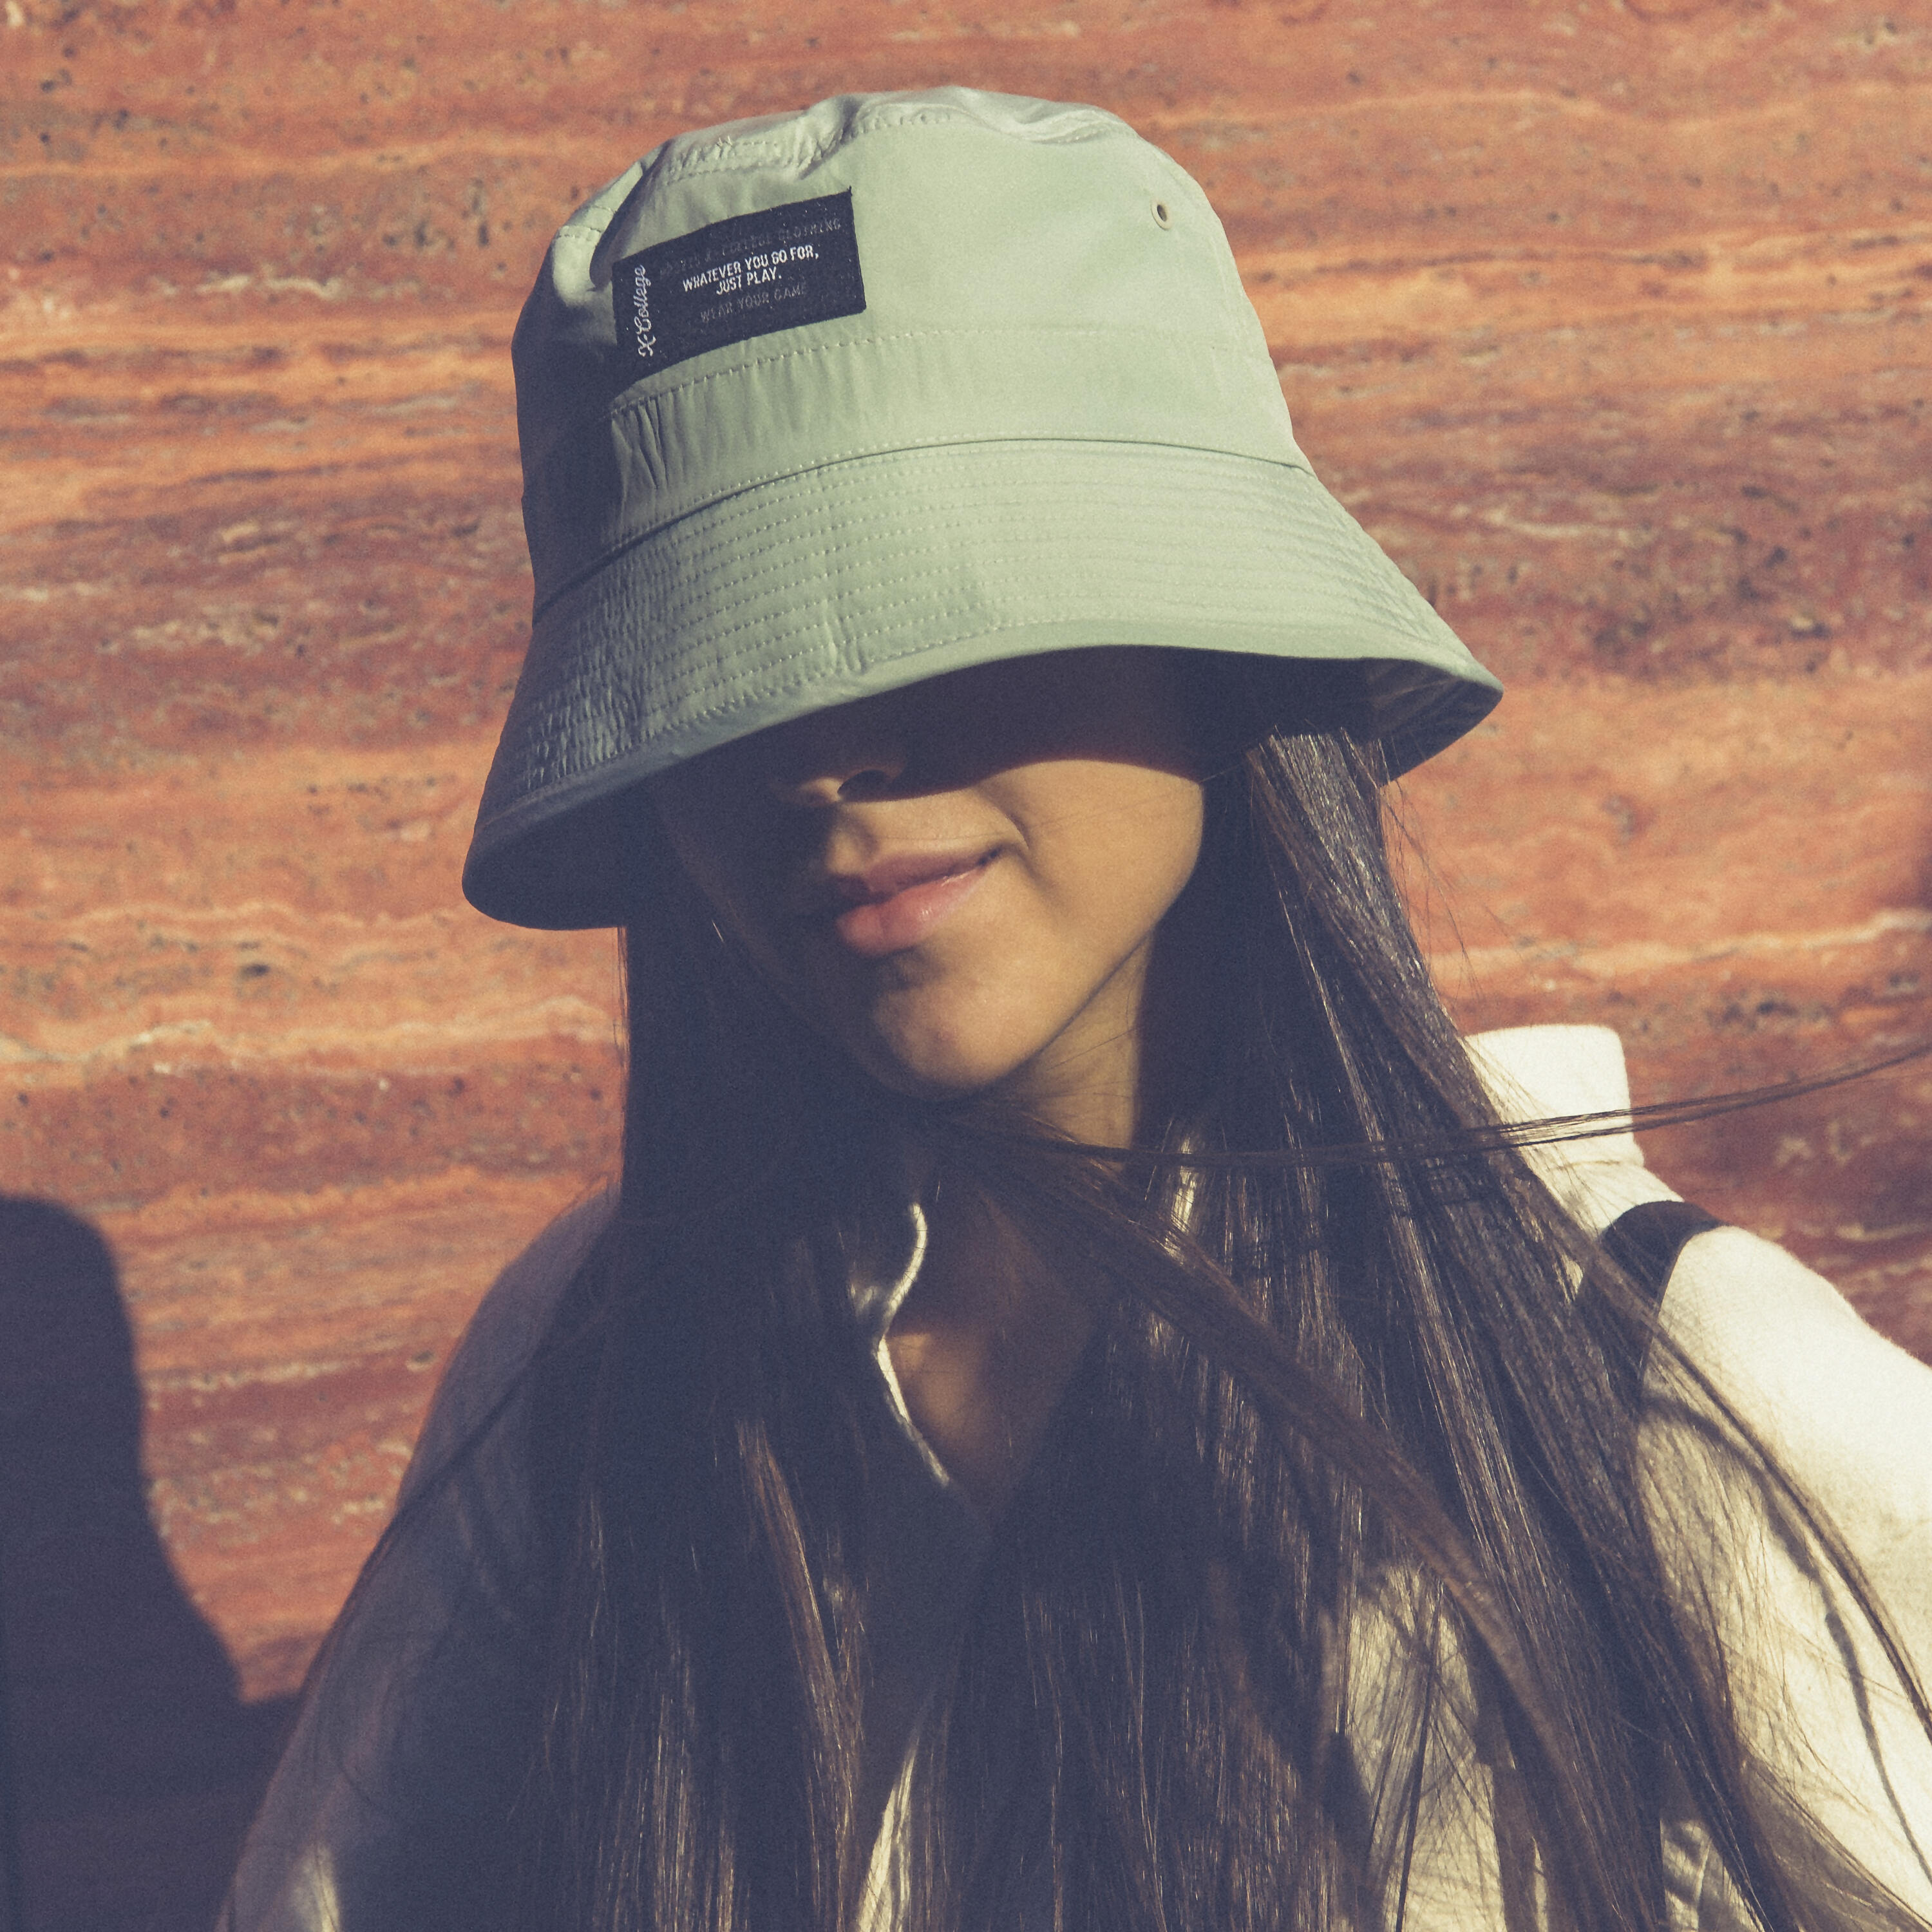 Bucket Hat Fashion Discount Code For A91a3 84485